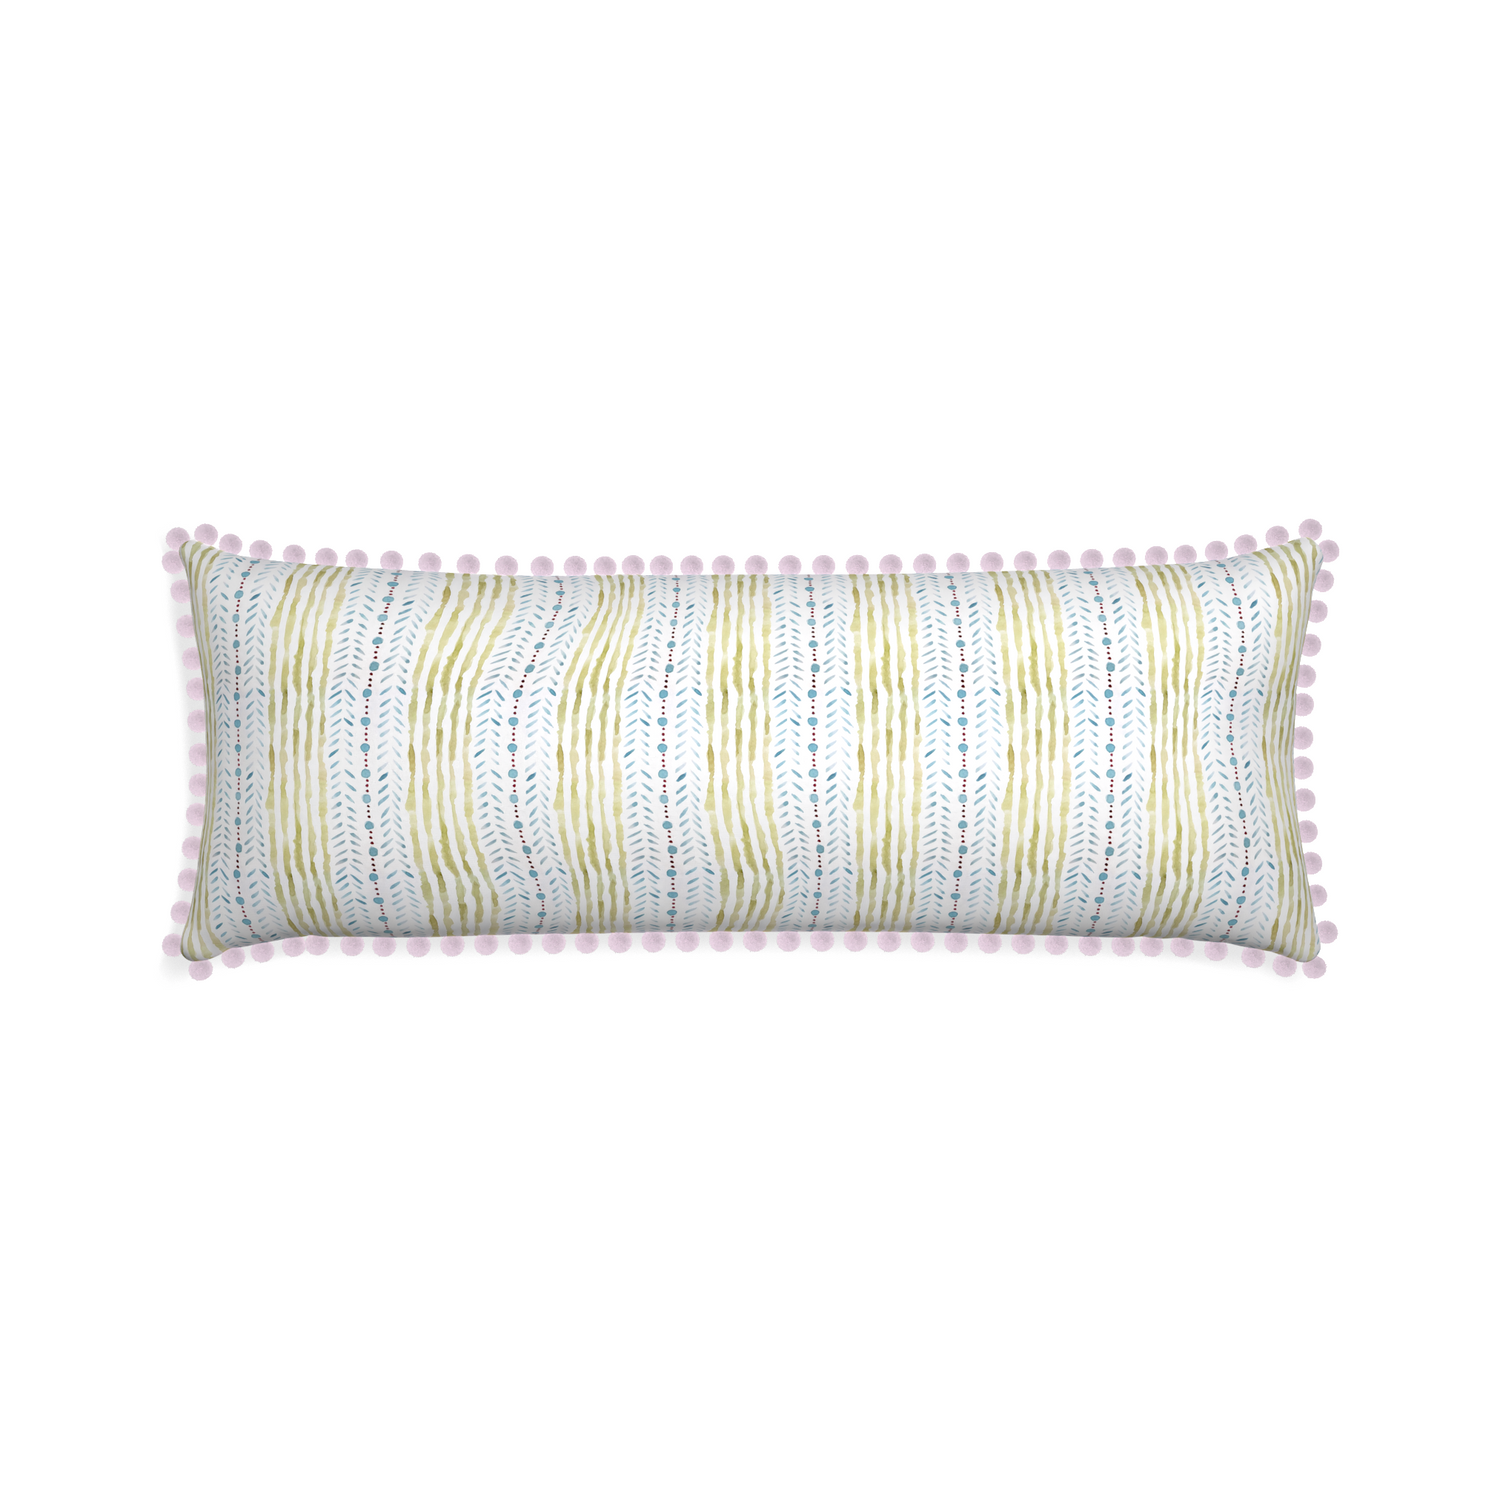 Xl-lumbar julia custom pillow with l on white background